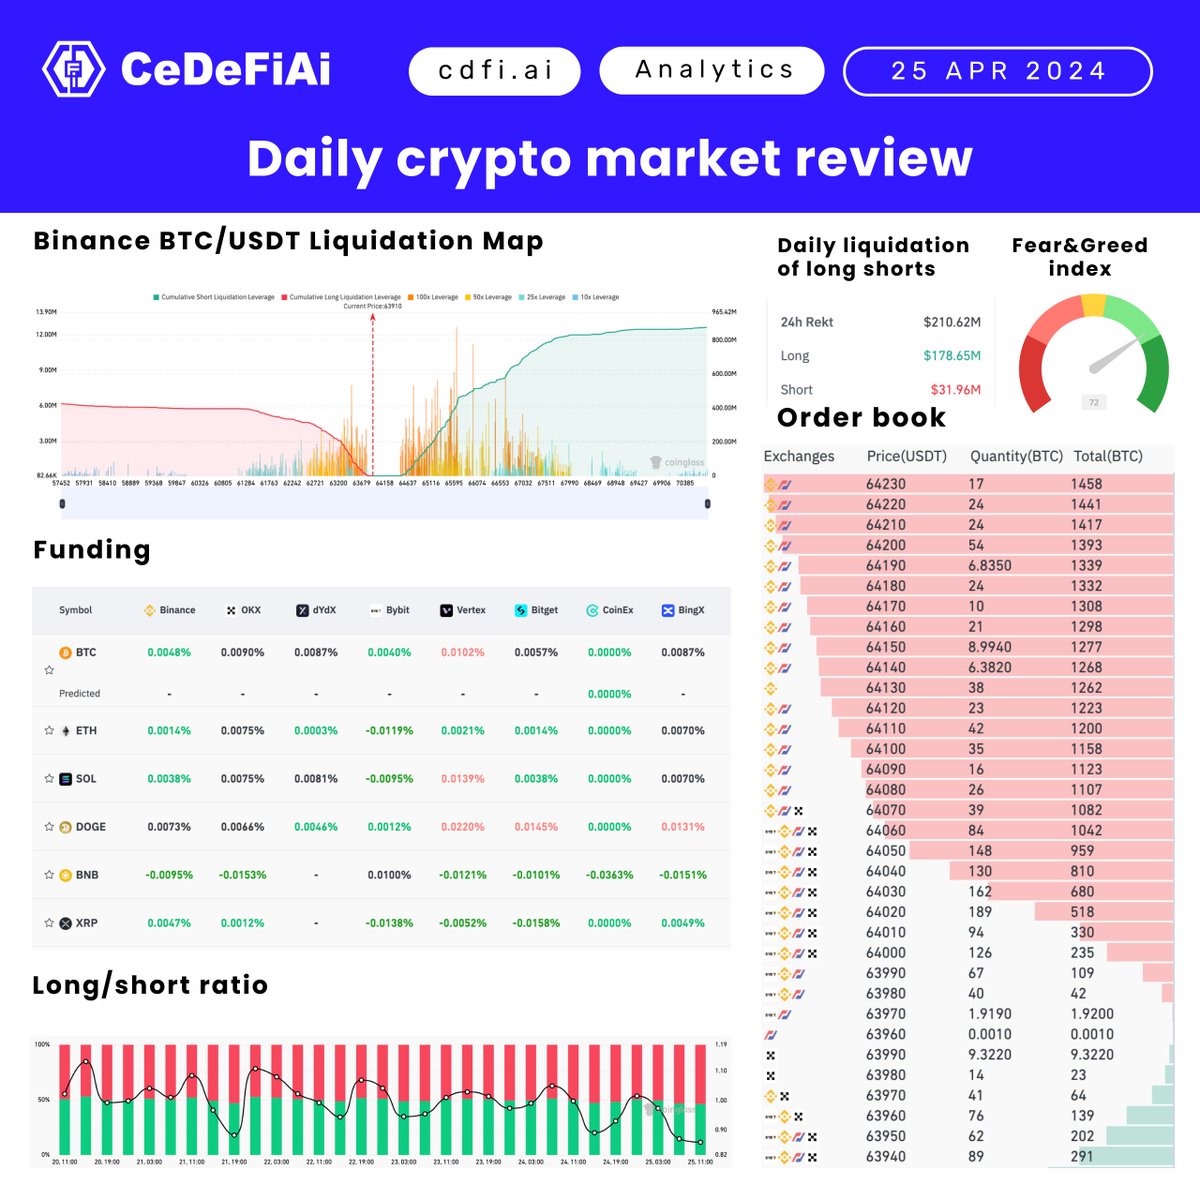 Happy Thursday, crypto fam! 📉 

Most alts are in the red today, but there's always a silver lining. 

$CDFI/USDT on MEXC at $0.37684. Stay sharp and keep an eye on the market! 🔍
👉 Get the full scoop: mexc.com/exchange/CDFI_…

#CeDeFiAi #CryptoMarket #TradingUpdate